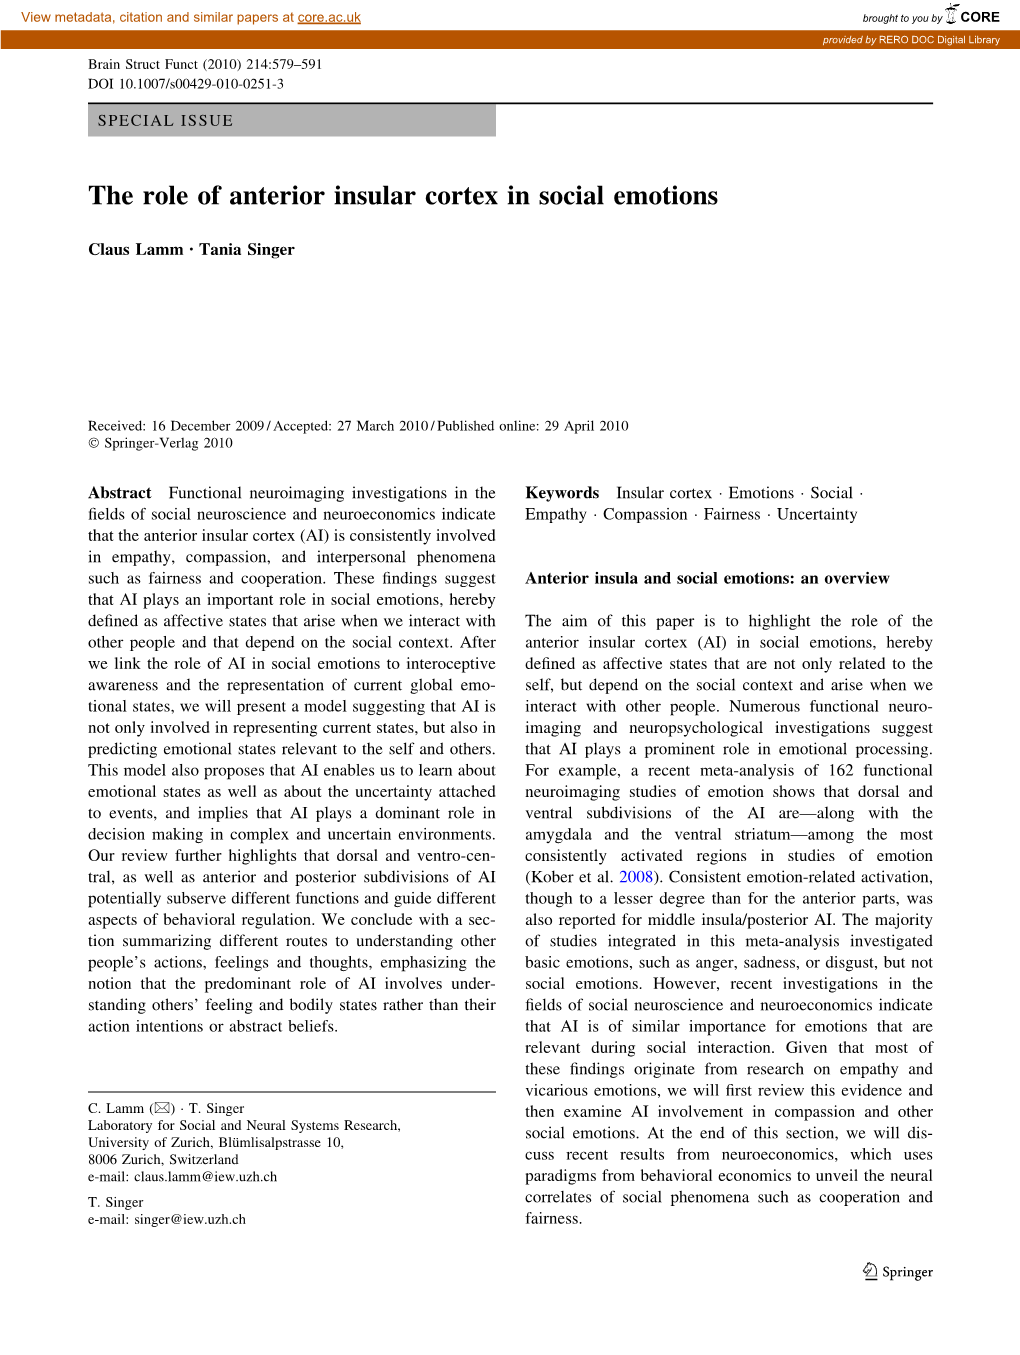 The Role of Anterior Insular Cortex in Social Emotions